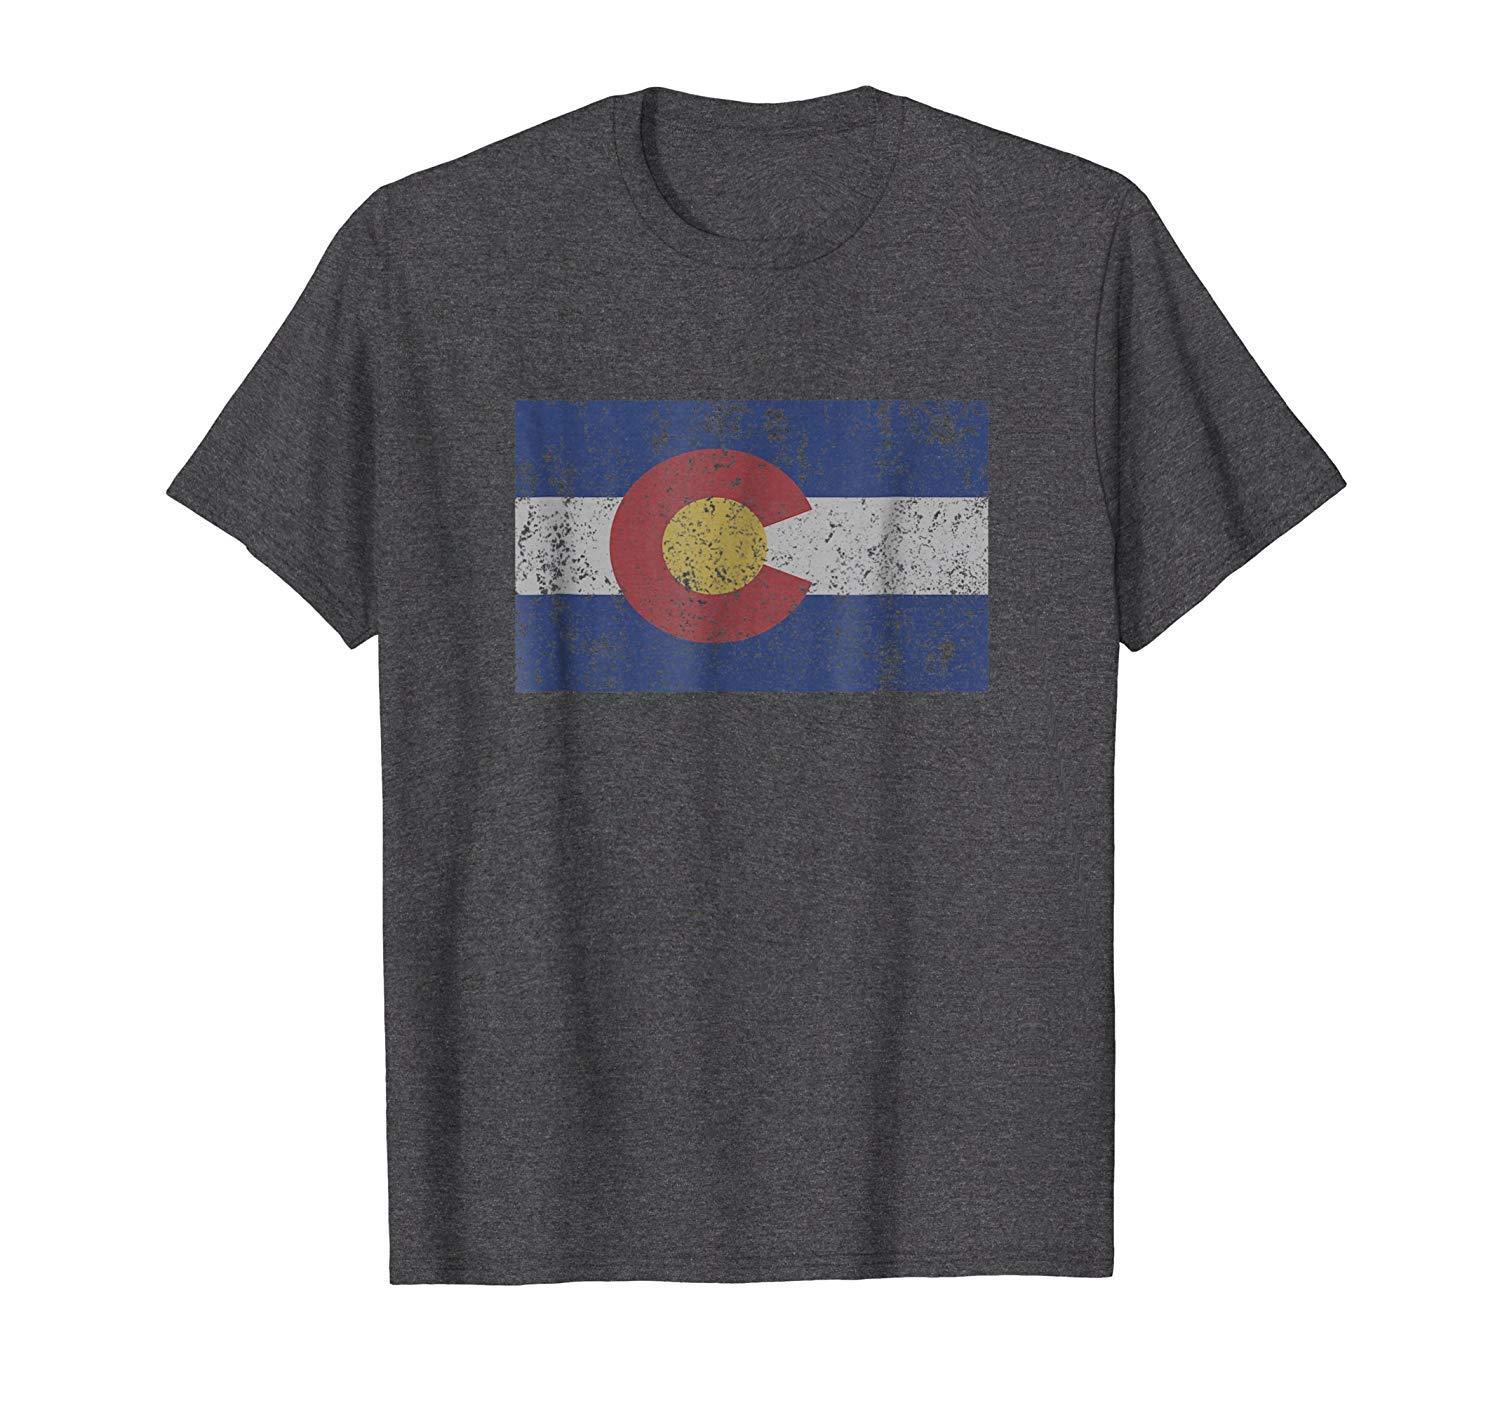 Check Out This Awesome Colorado State Flag Denver Rocky Mountain Color Shirts